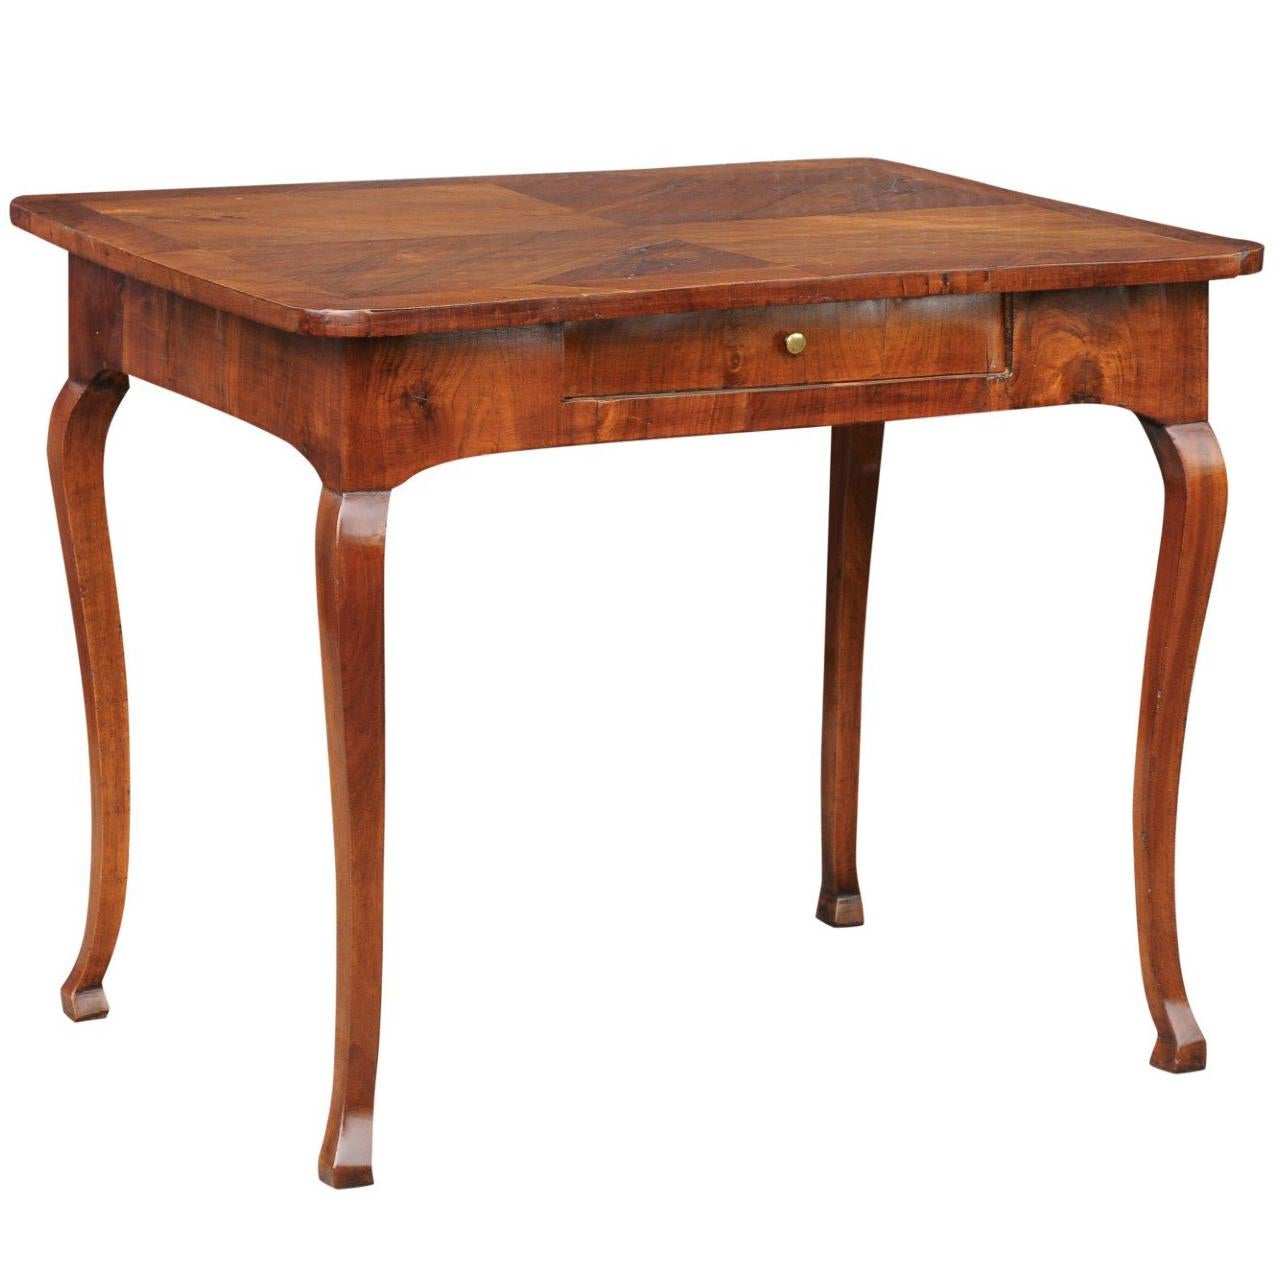 Italian 1780s Walnut Table with Quarter Veneer, Single Drawer and Cabriole Legs